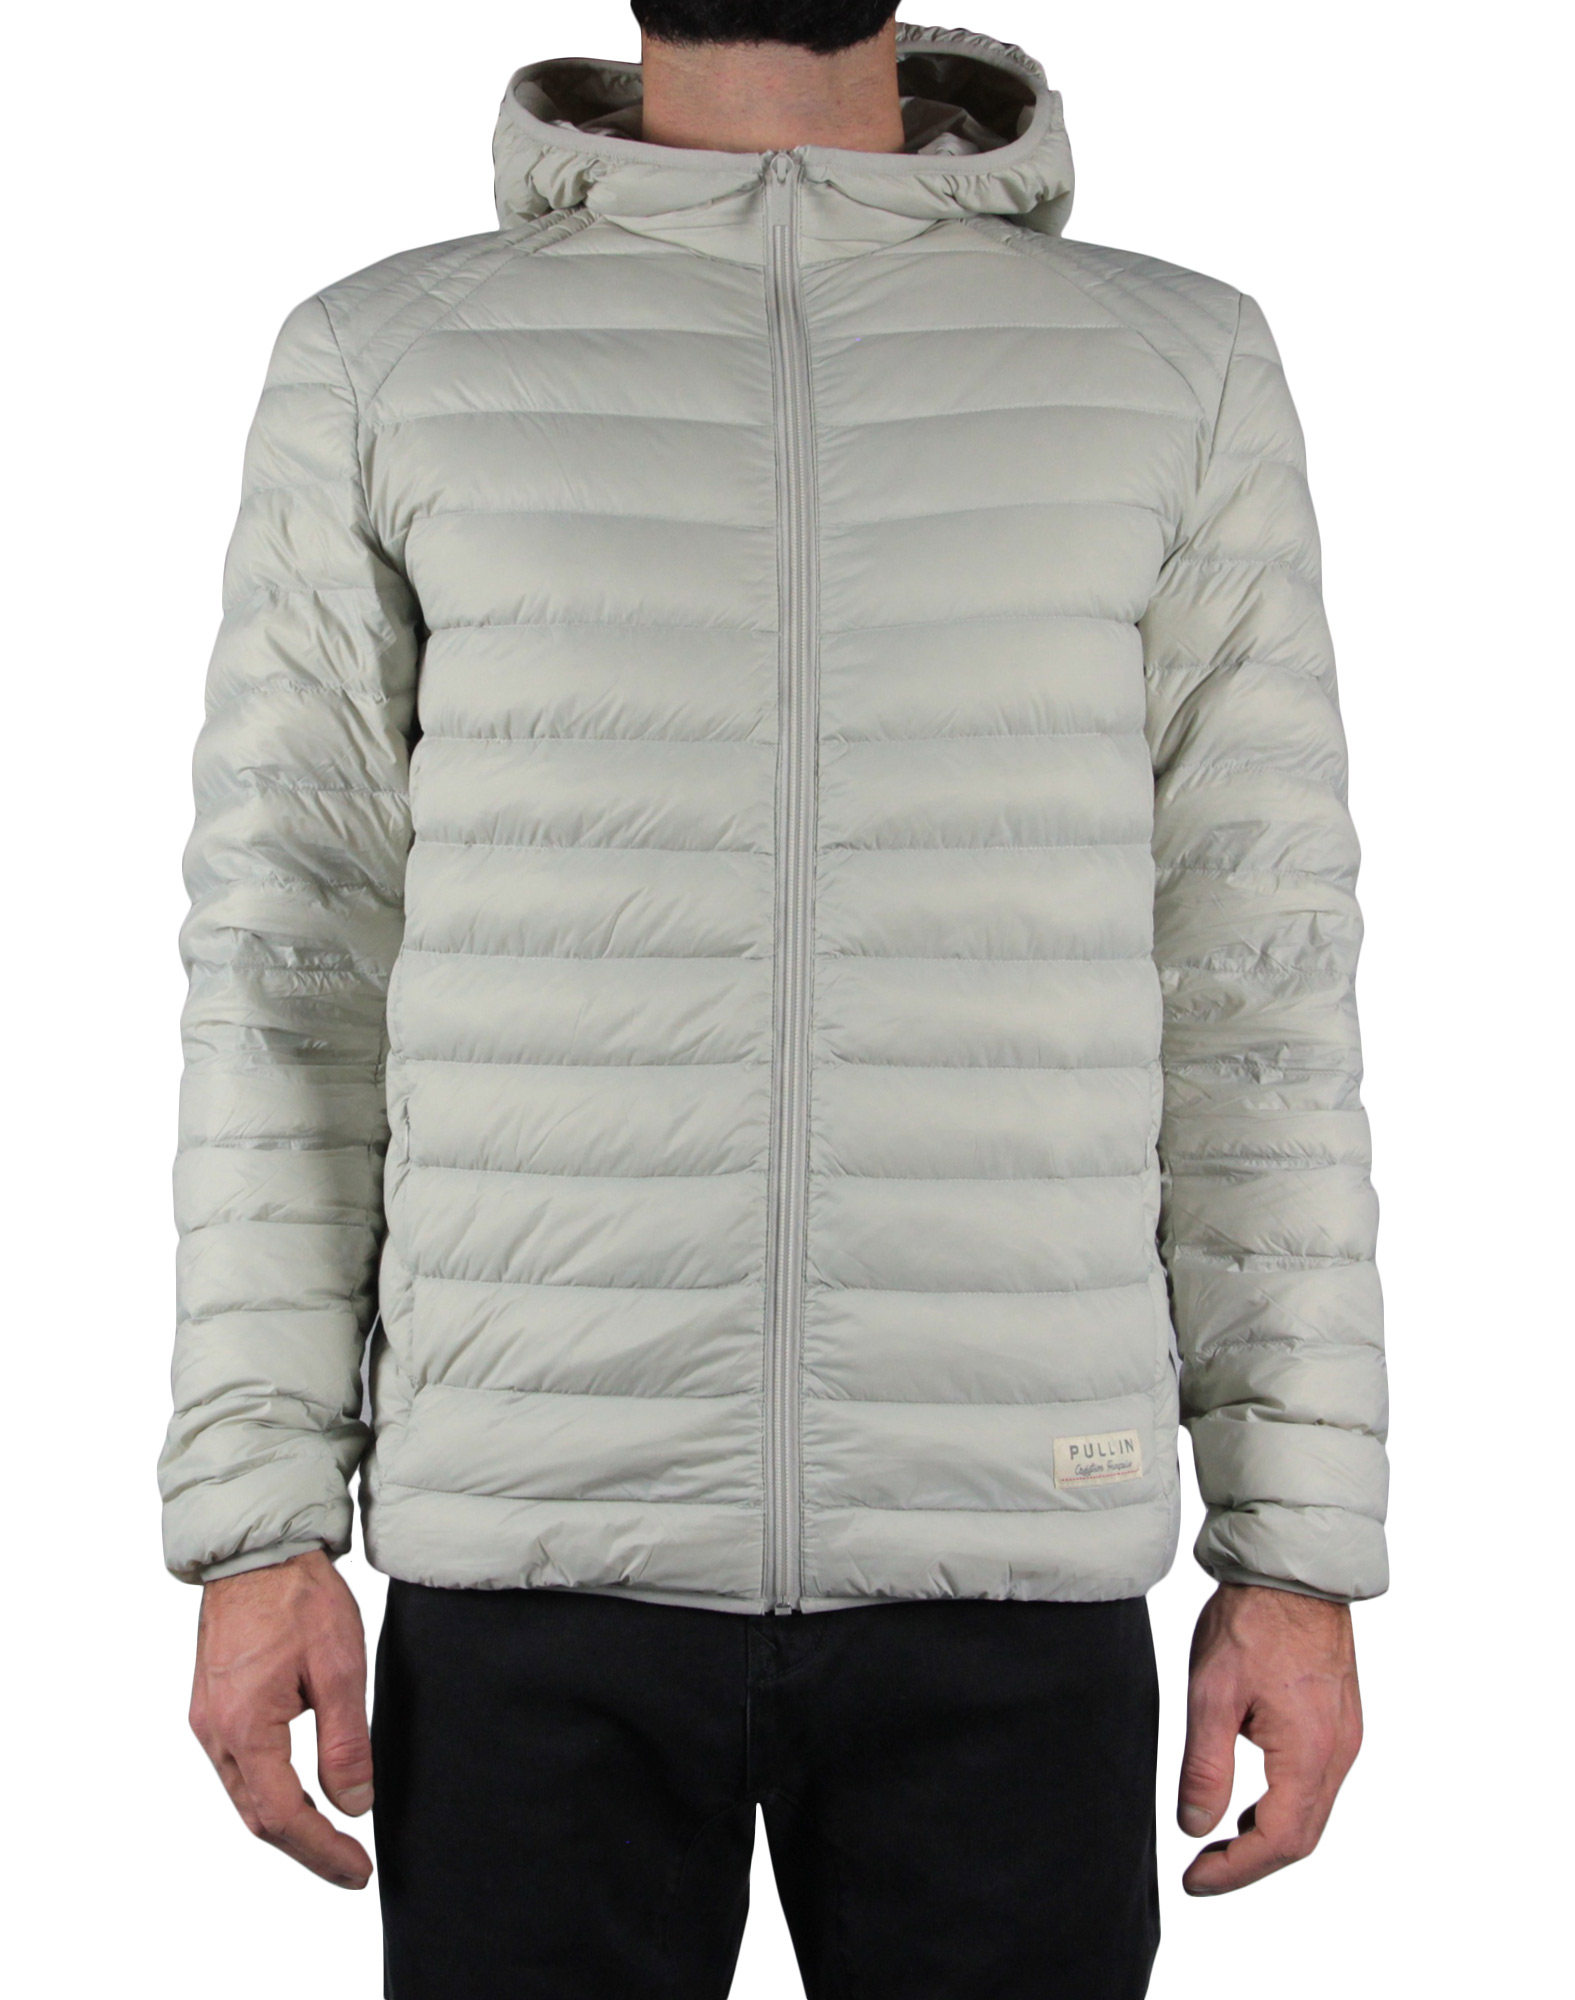 Men's feather jacket with hood SOCAL